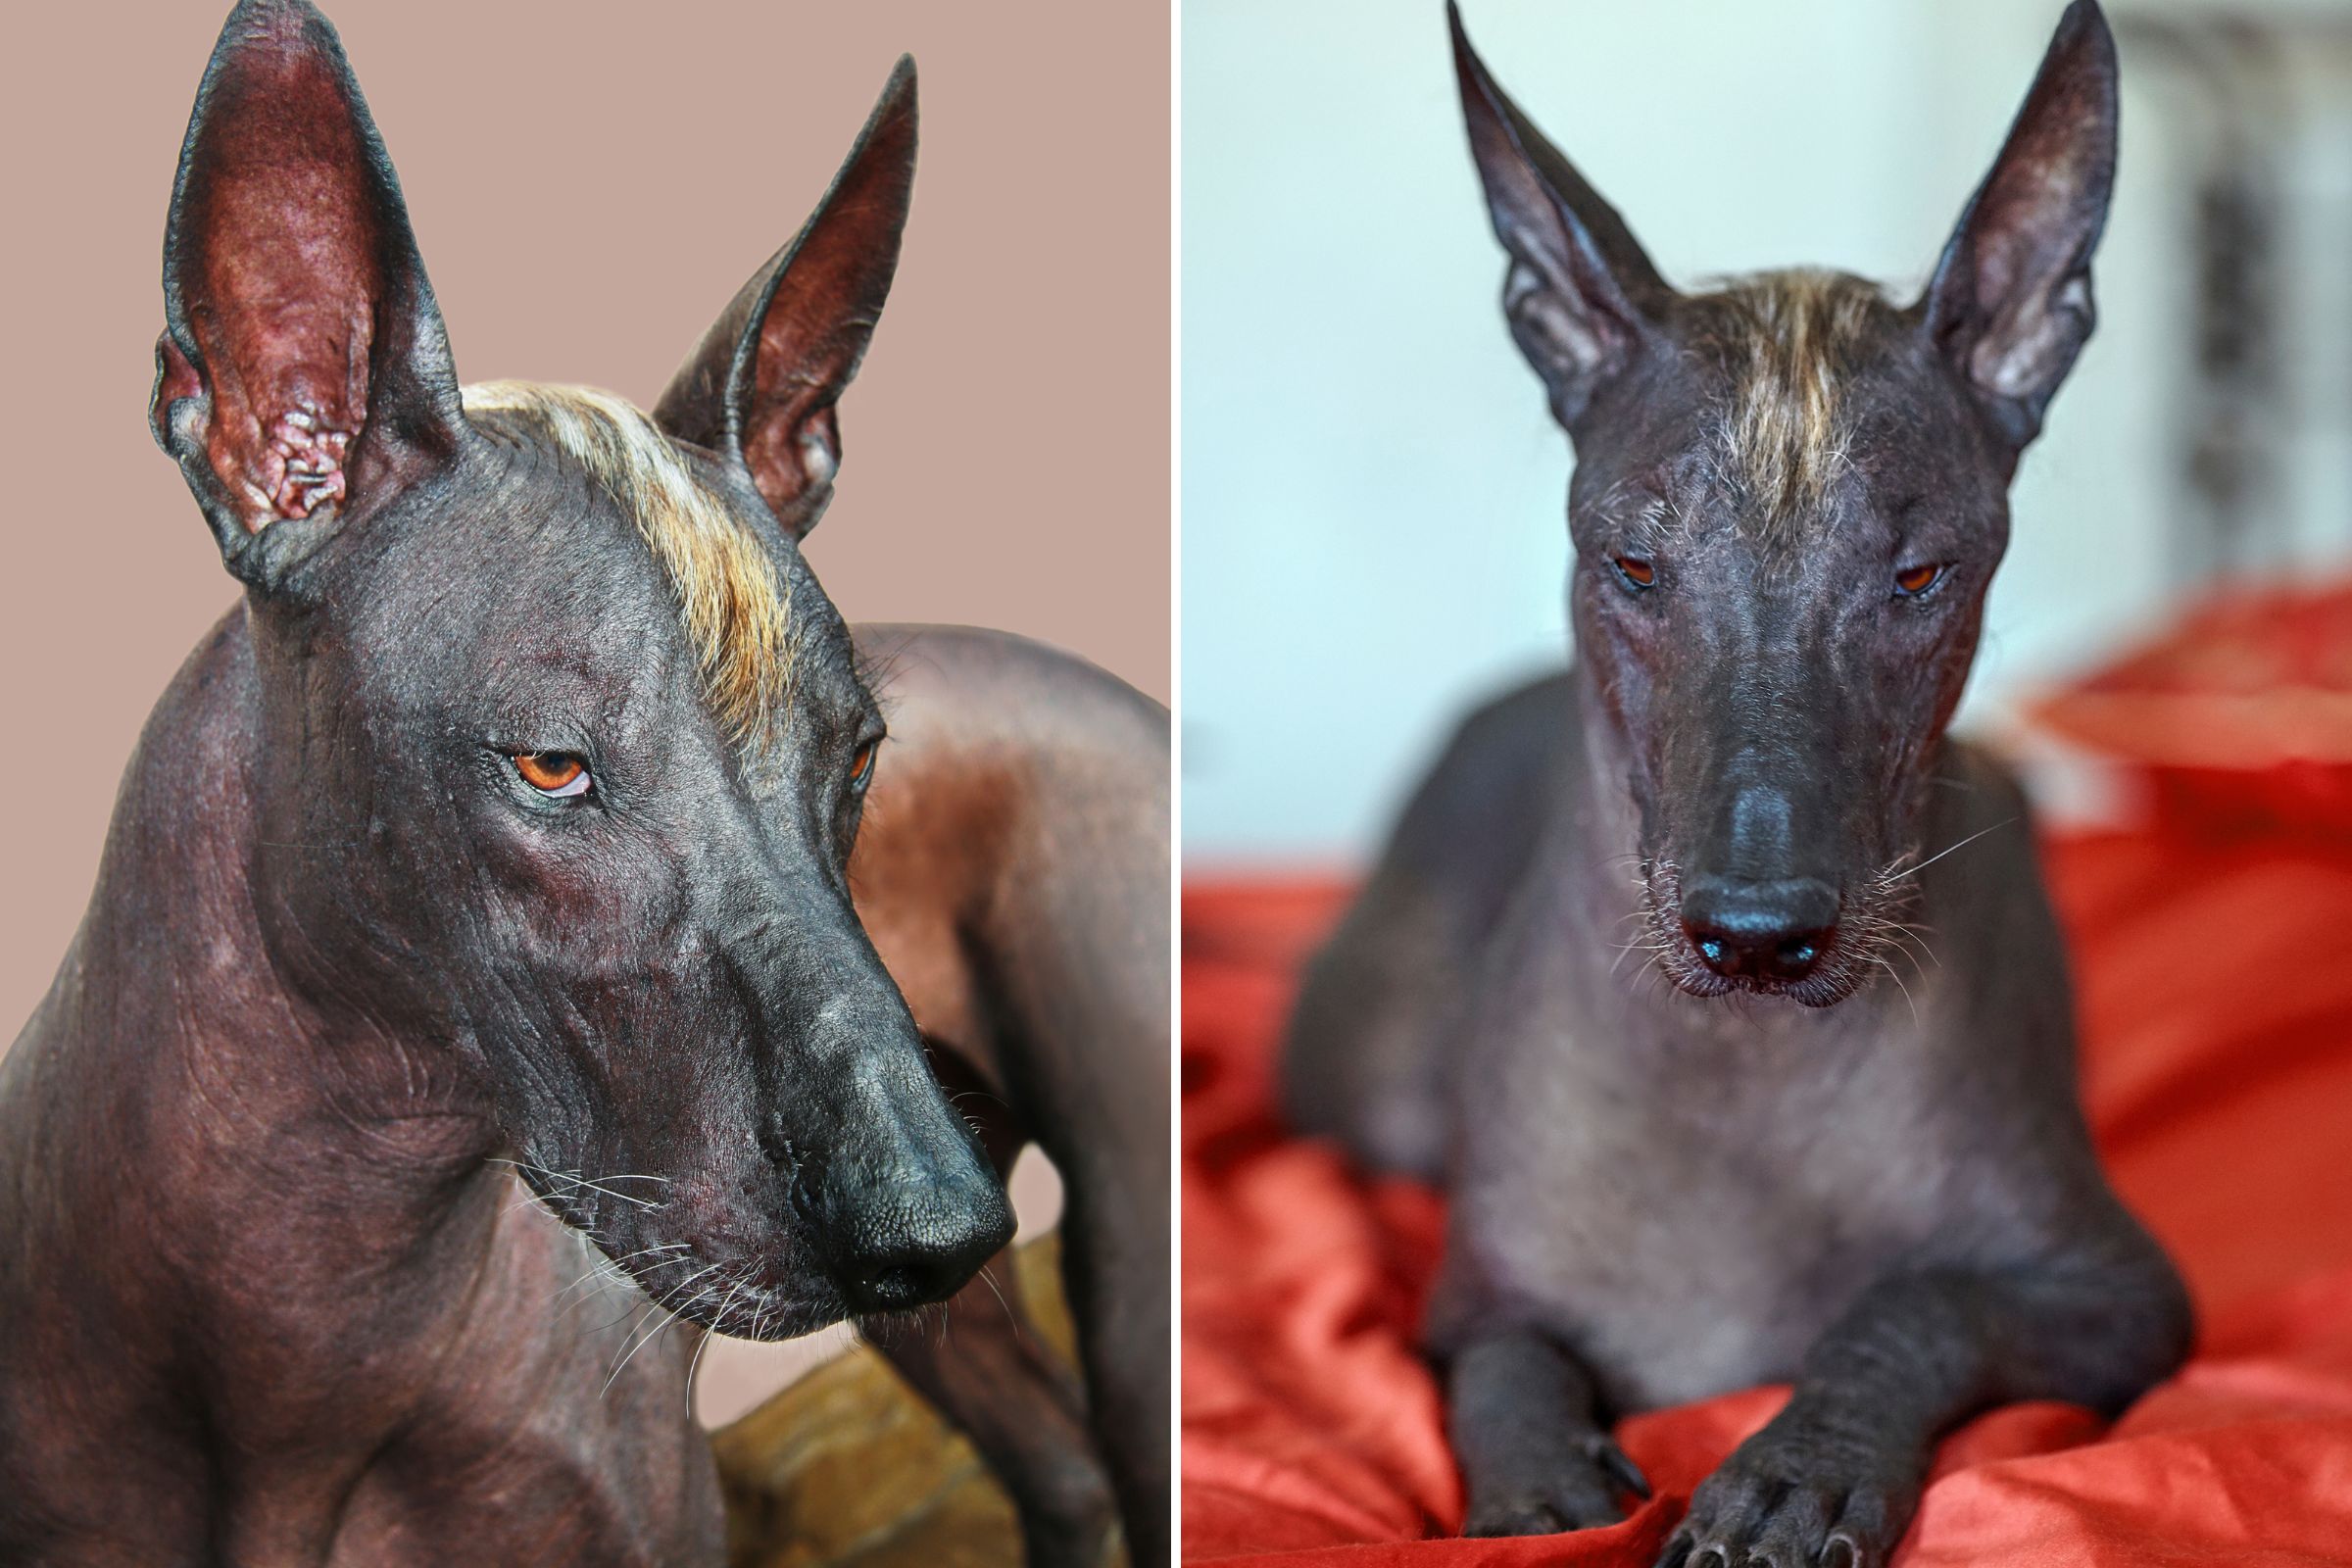 Statue-like dog breed from ancient history amazes the internet: ‘Anubis Vibes’